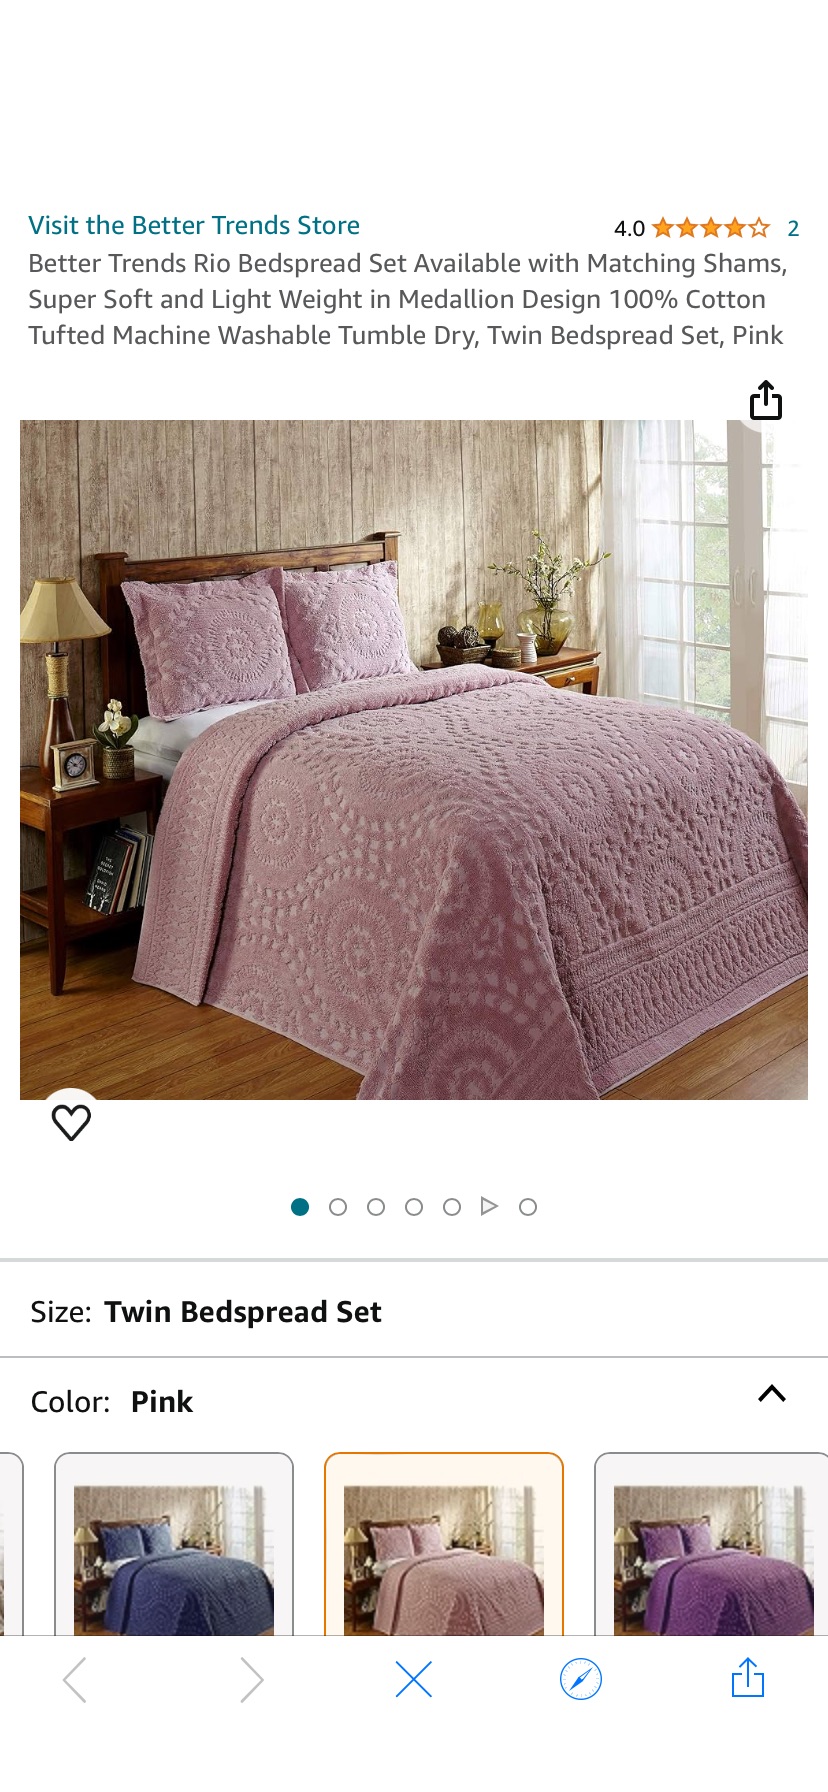 Amazon.com: Better Trends Rio Bedspread Set Available with Matching Shams, Super Soft and Light Weight in Medallion Design 100% Cotton Tufted Machine Washable Tumble Dry, Twin Bedspread Set, Pink : Ho